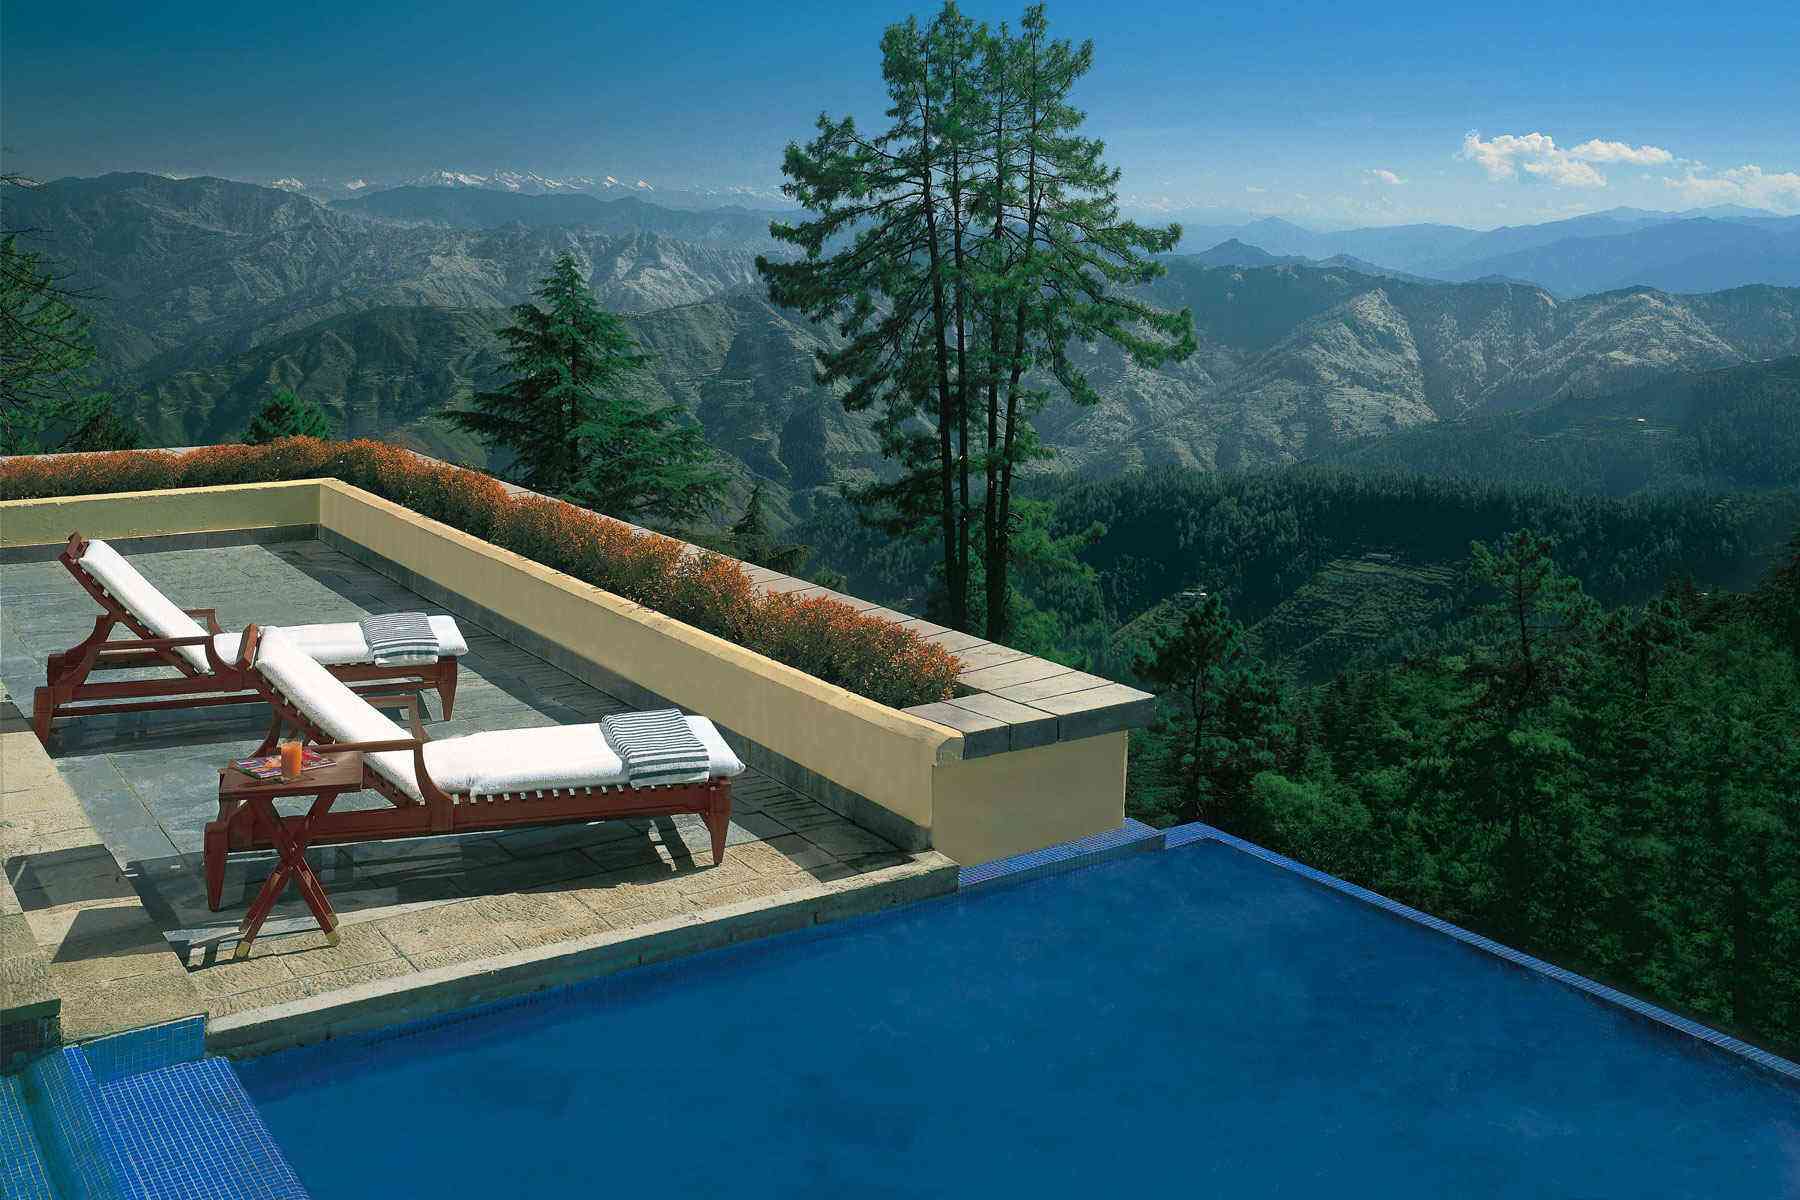 World's 15 Most Stunning Mountaintop Hotels – Fodors Travel Guide